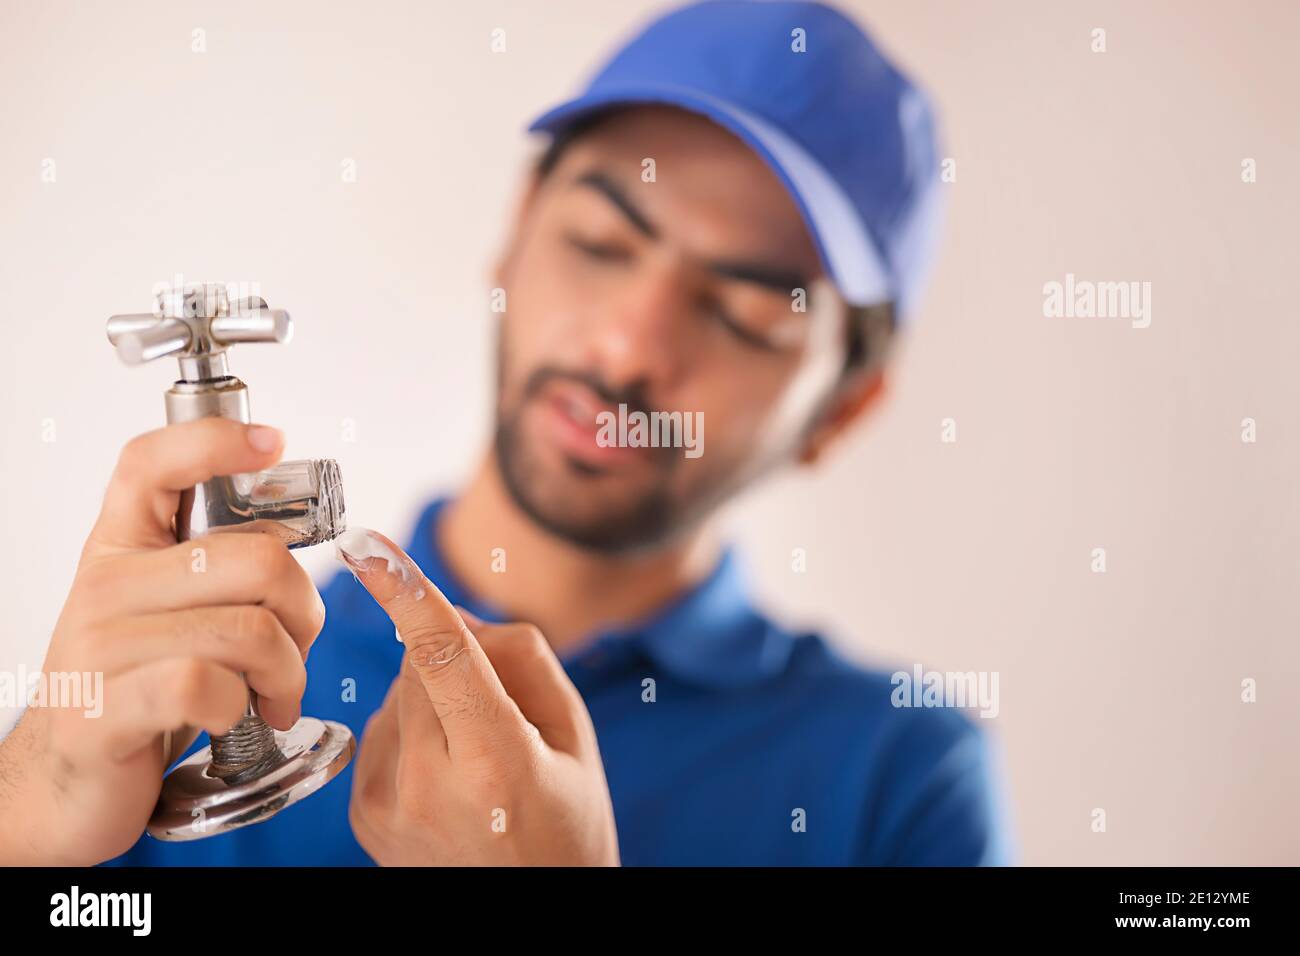 A BROKEN TAP BEING FIXED BY A PLUMBER Stock Photo